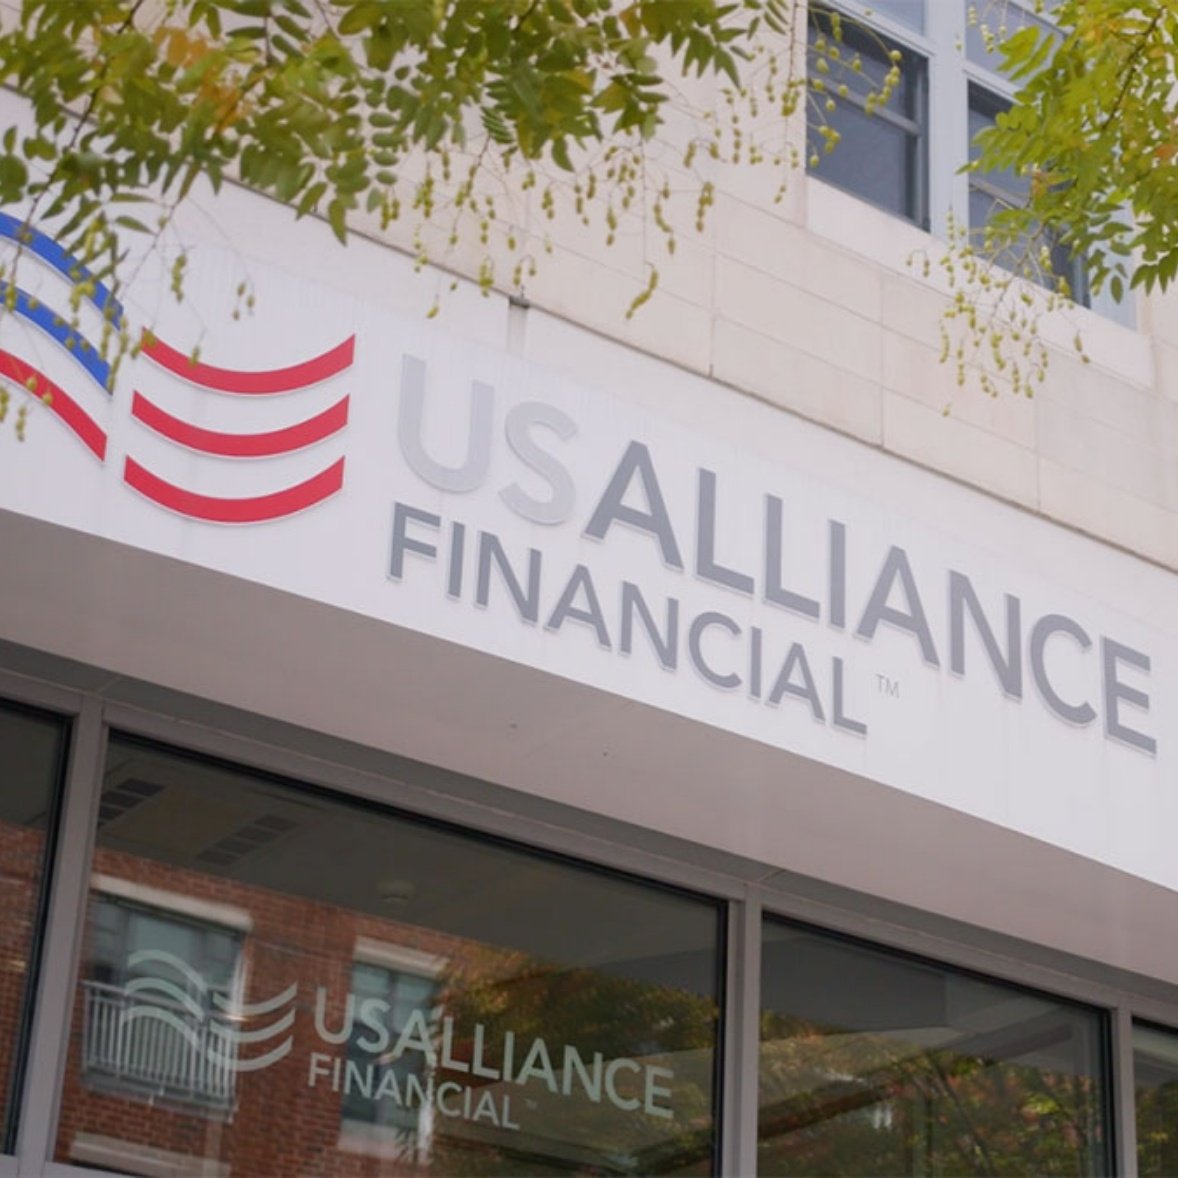 USALLIANCE Financial sign on the exterior of a building with glass windows below.